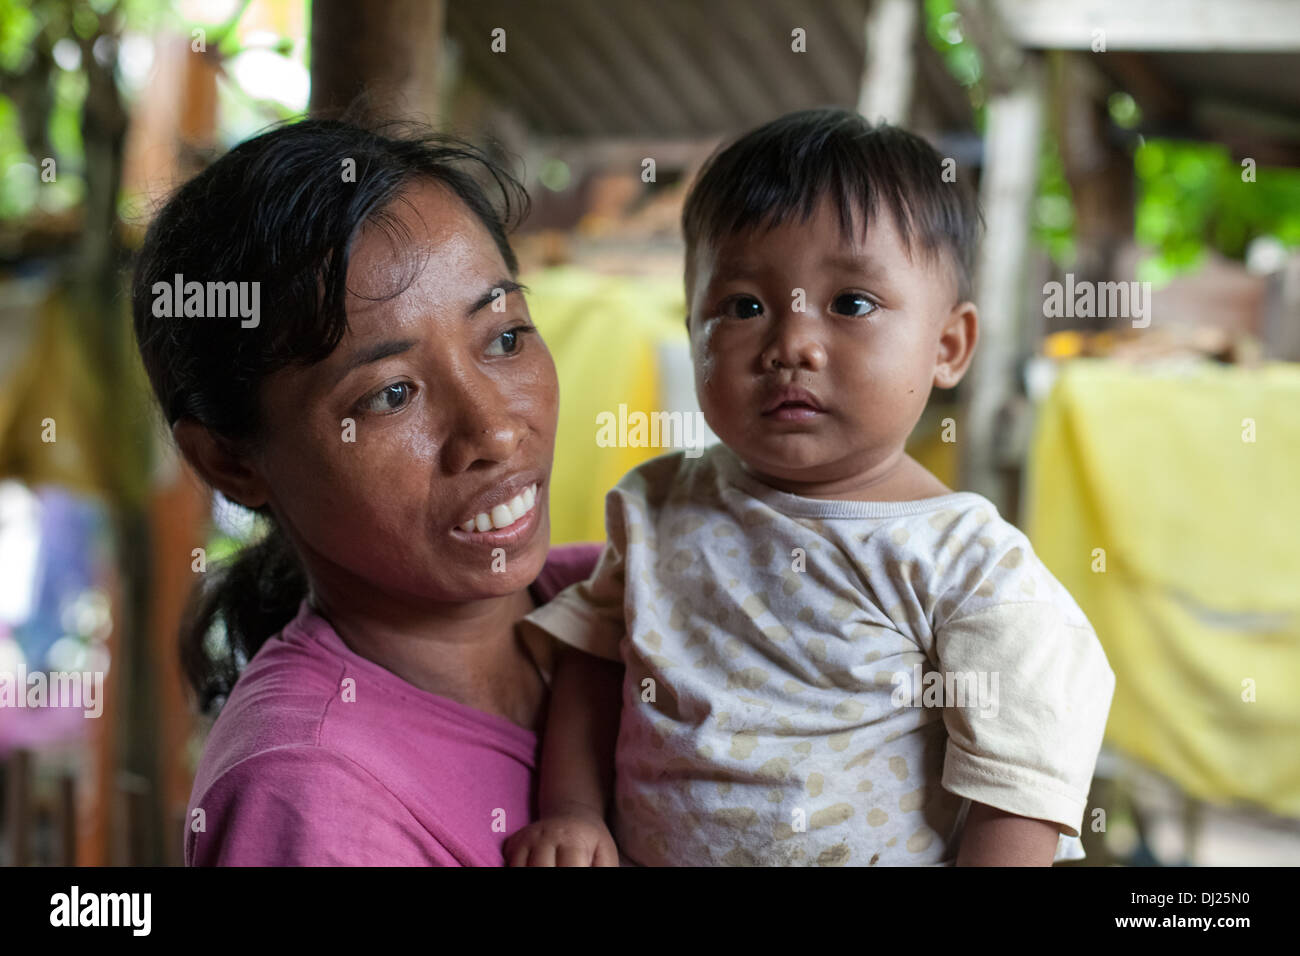 Mother child poor Bali poverty challenged extreme hold feed poor bellow standard Indonesia 29 house conditions harsh filthy Stock Photo